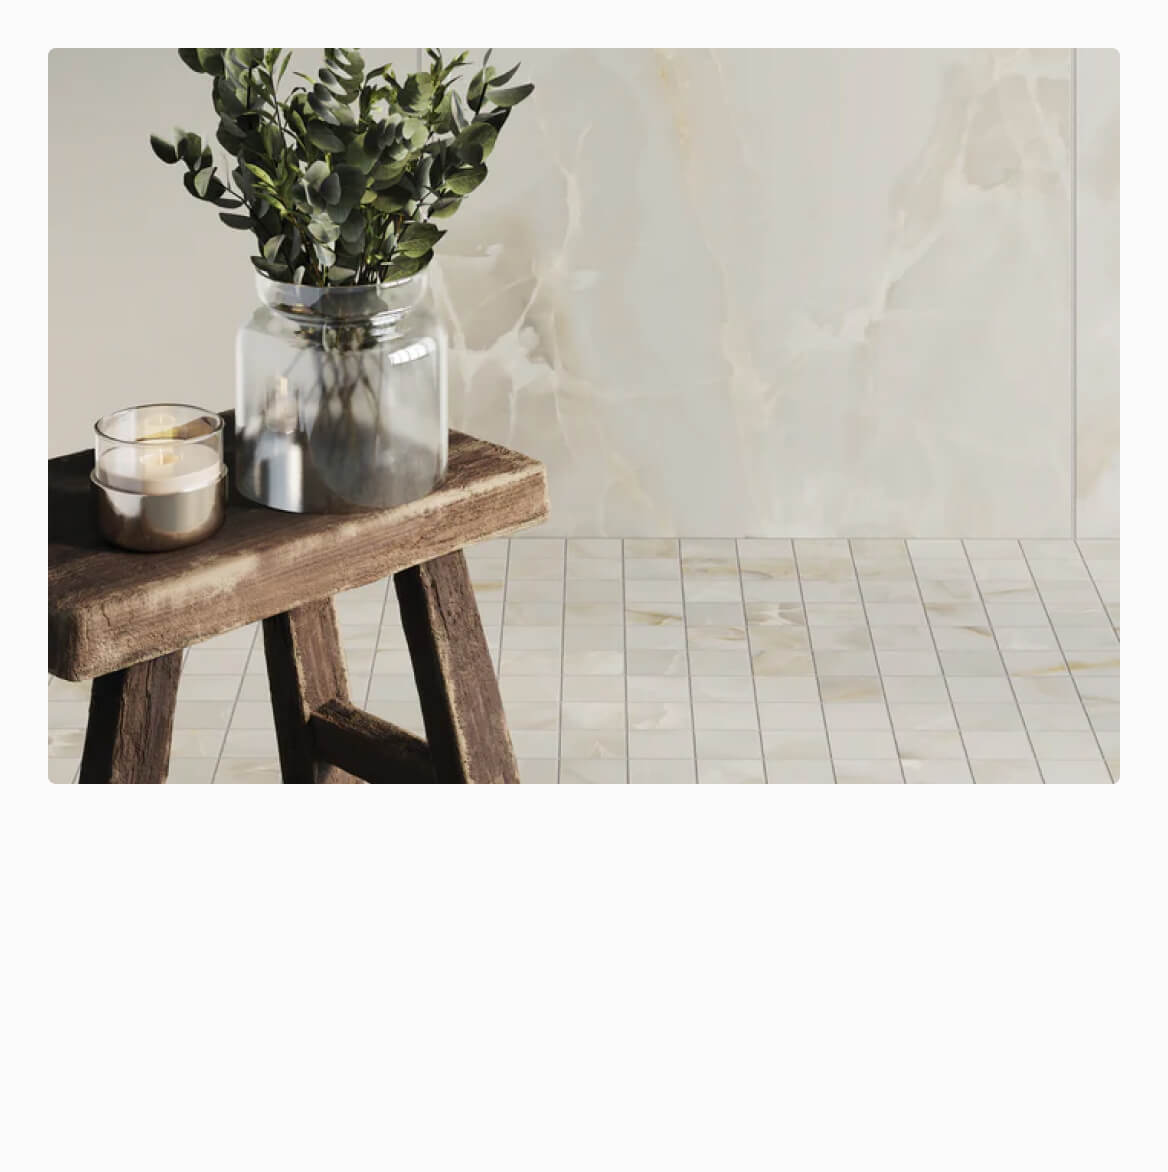 Rustic wooden stool against onyx-look tiles, with lush greenery in a clear vase